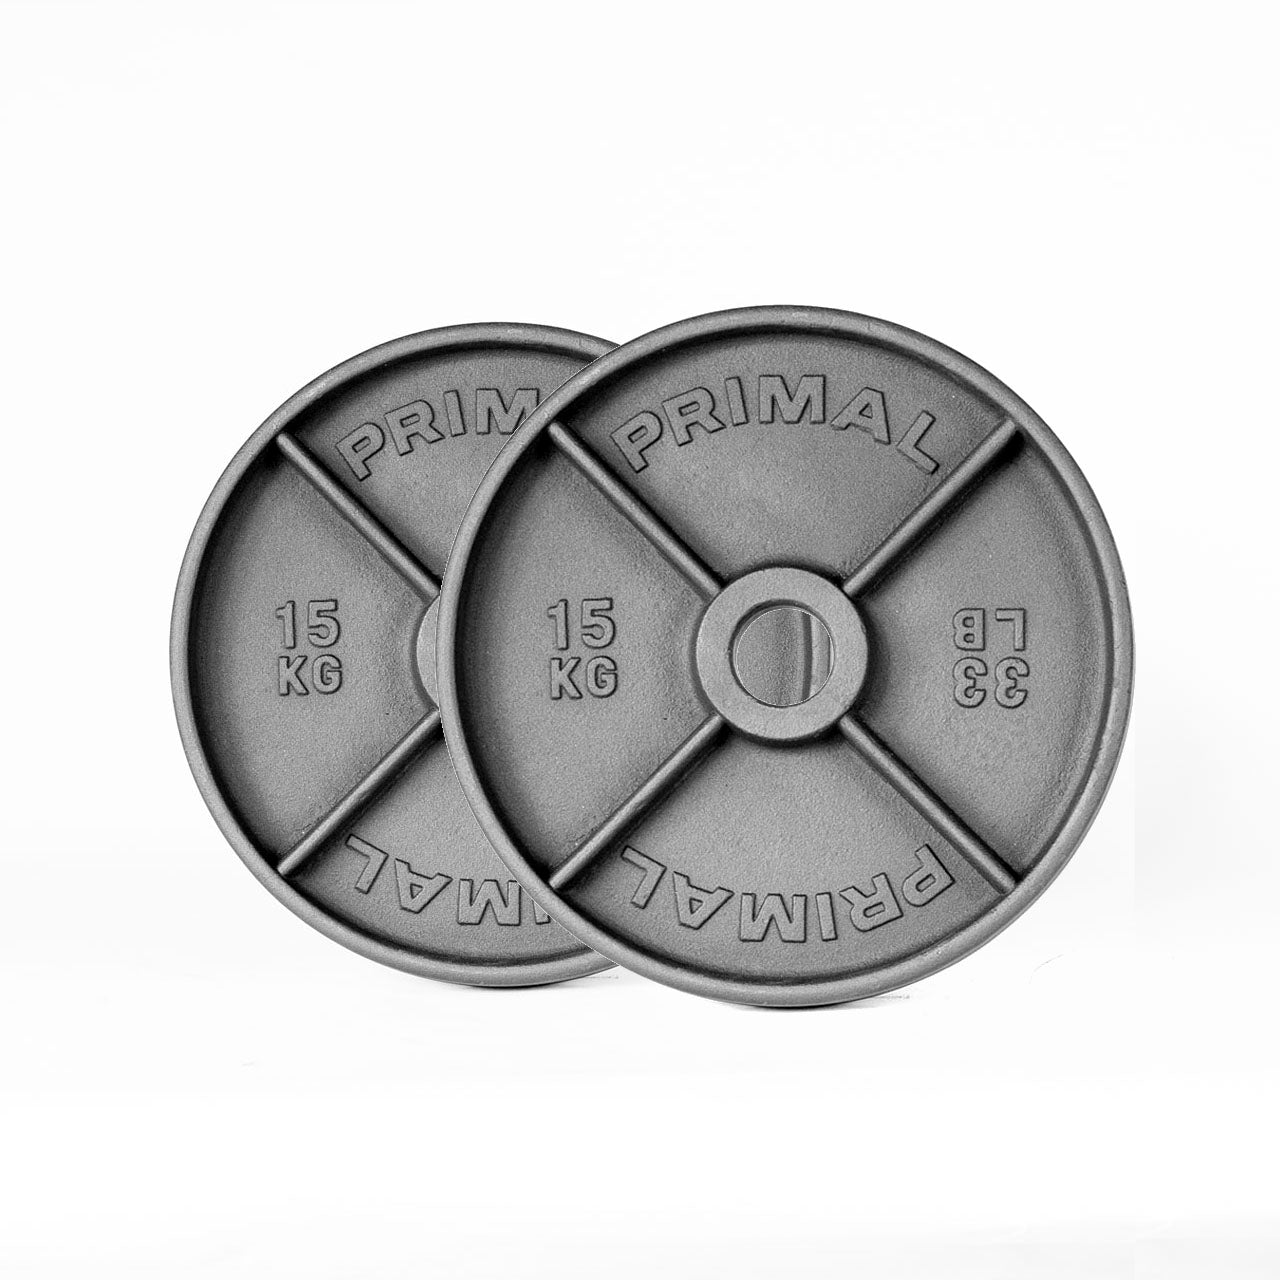 Primal Pro Series "Deep Dish" Olympic Weight Plate - 15kg (PAIR)